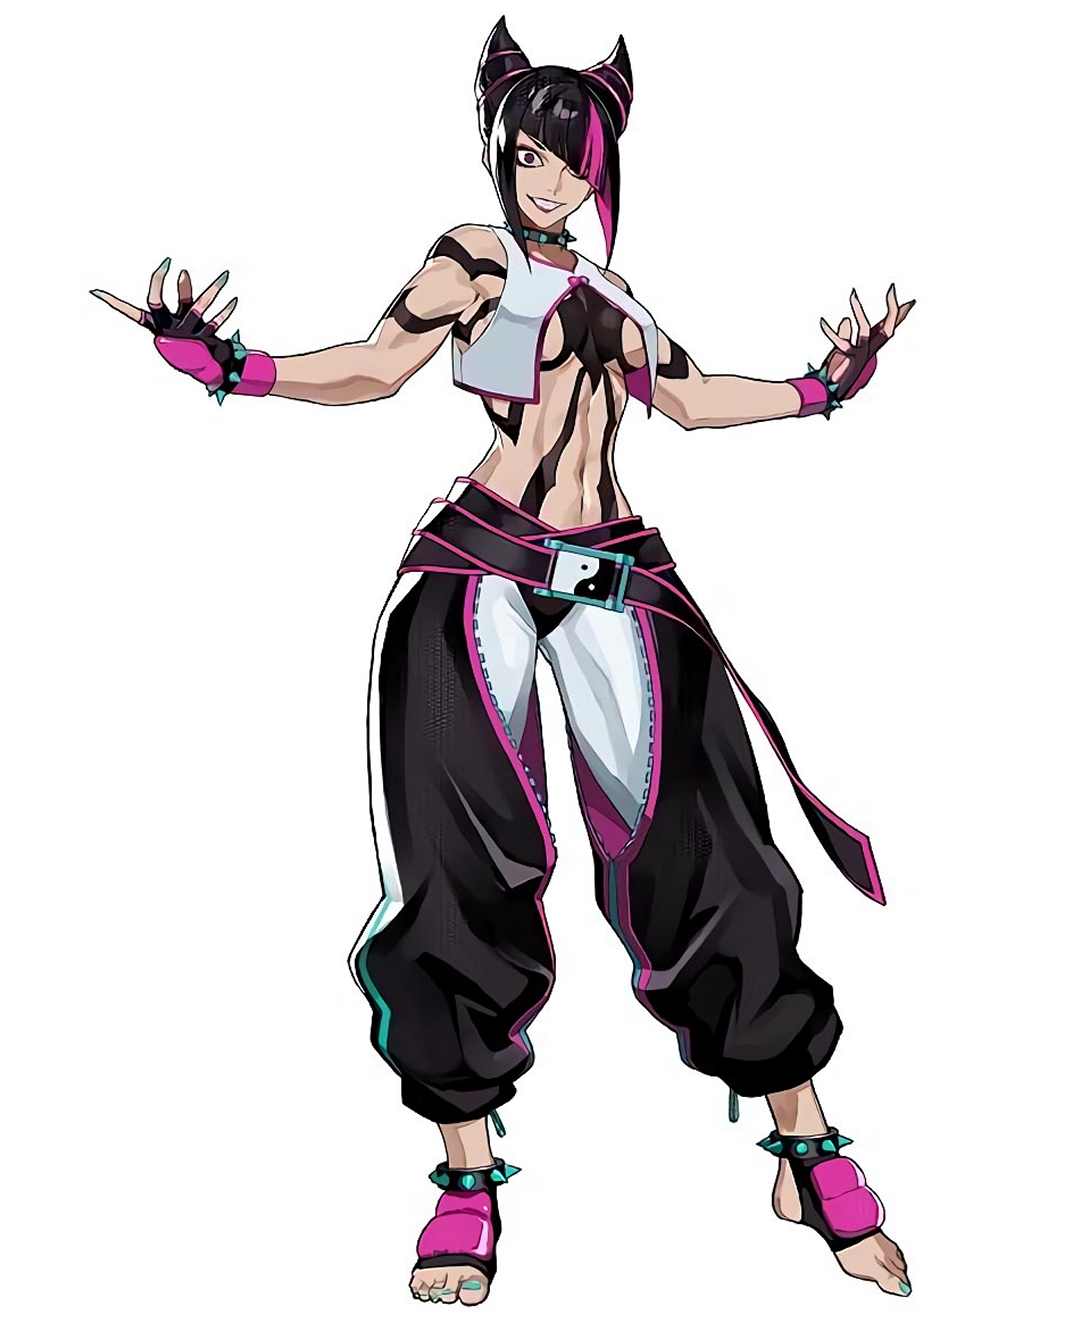 juri-streetfighter6-art-by-lam.png